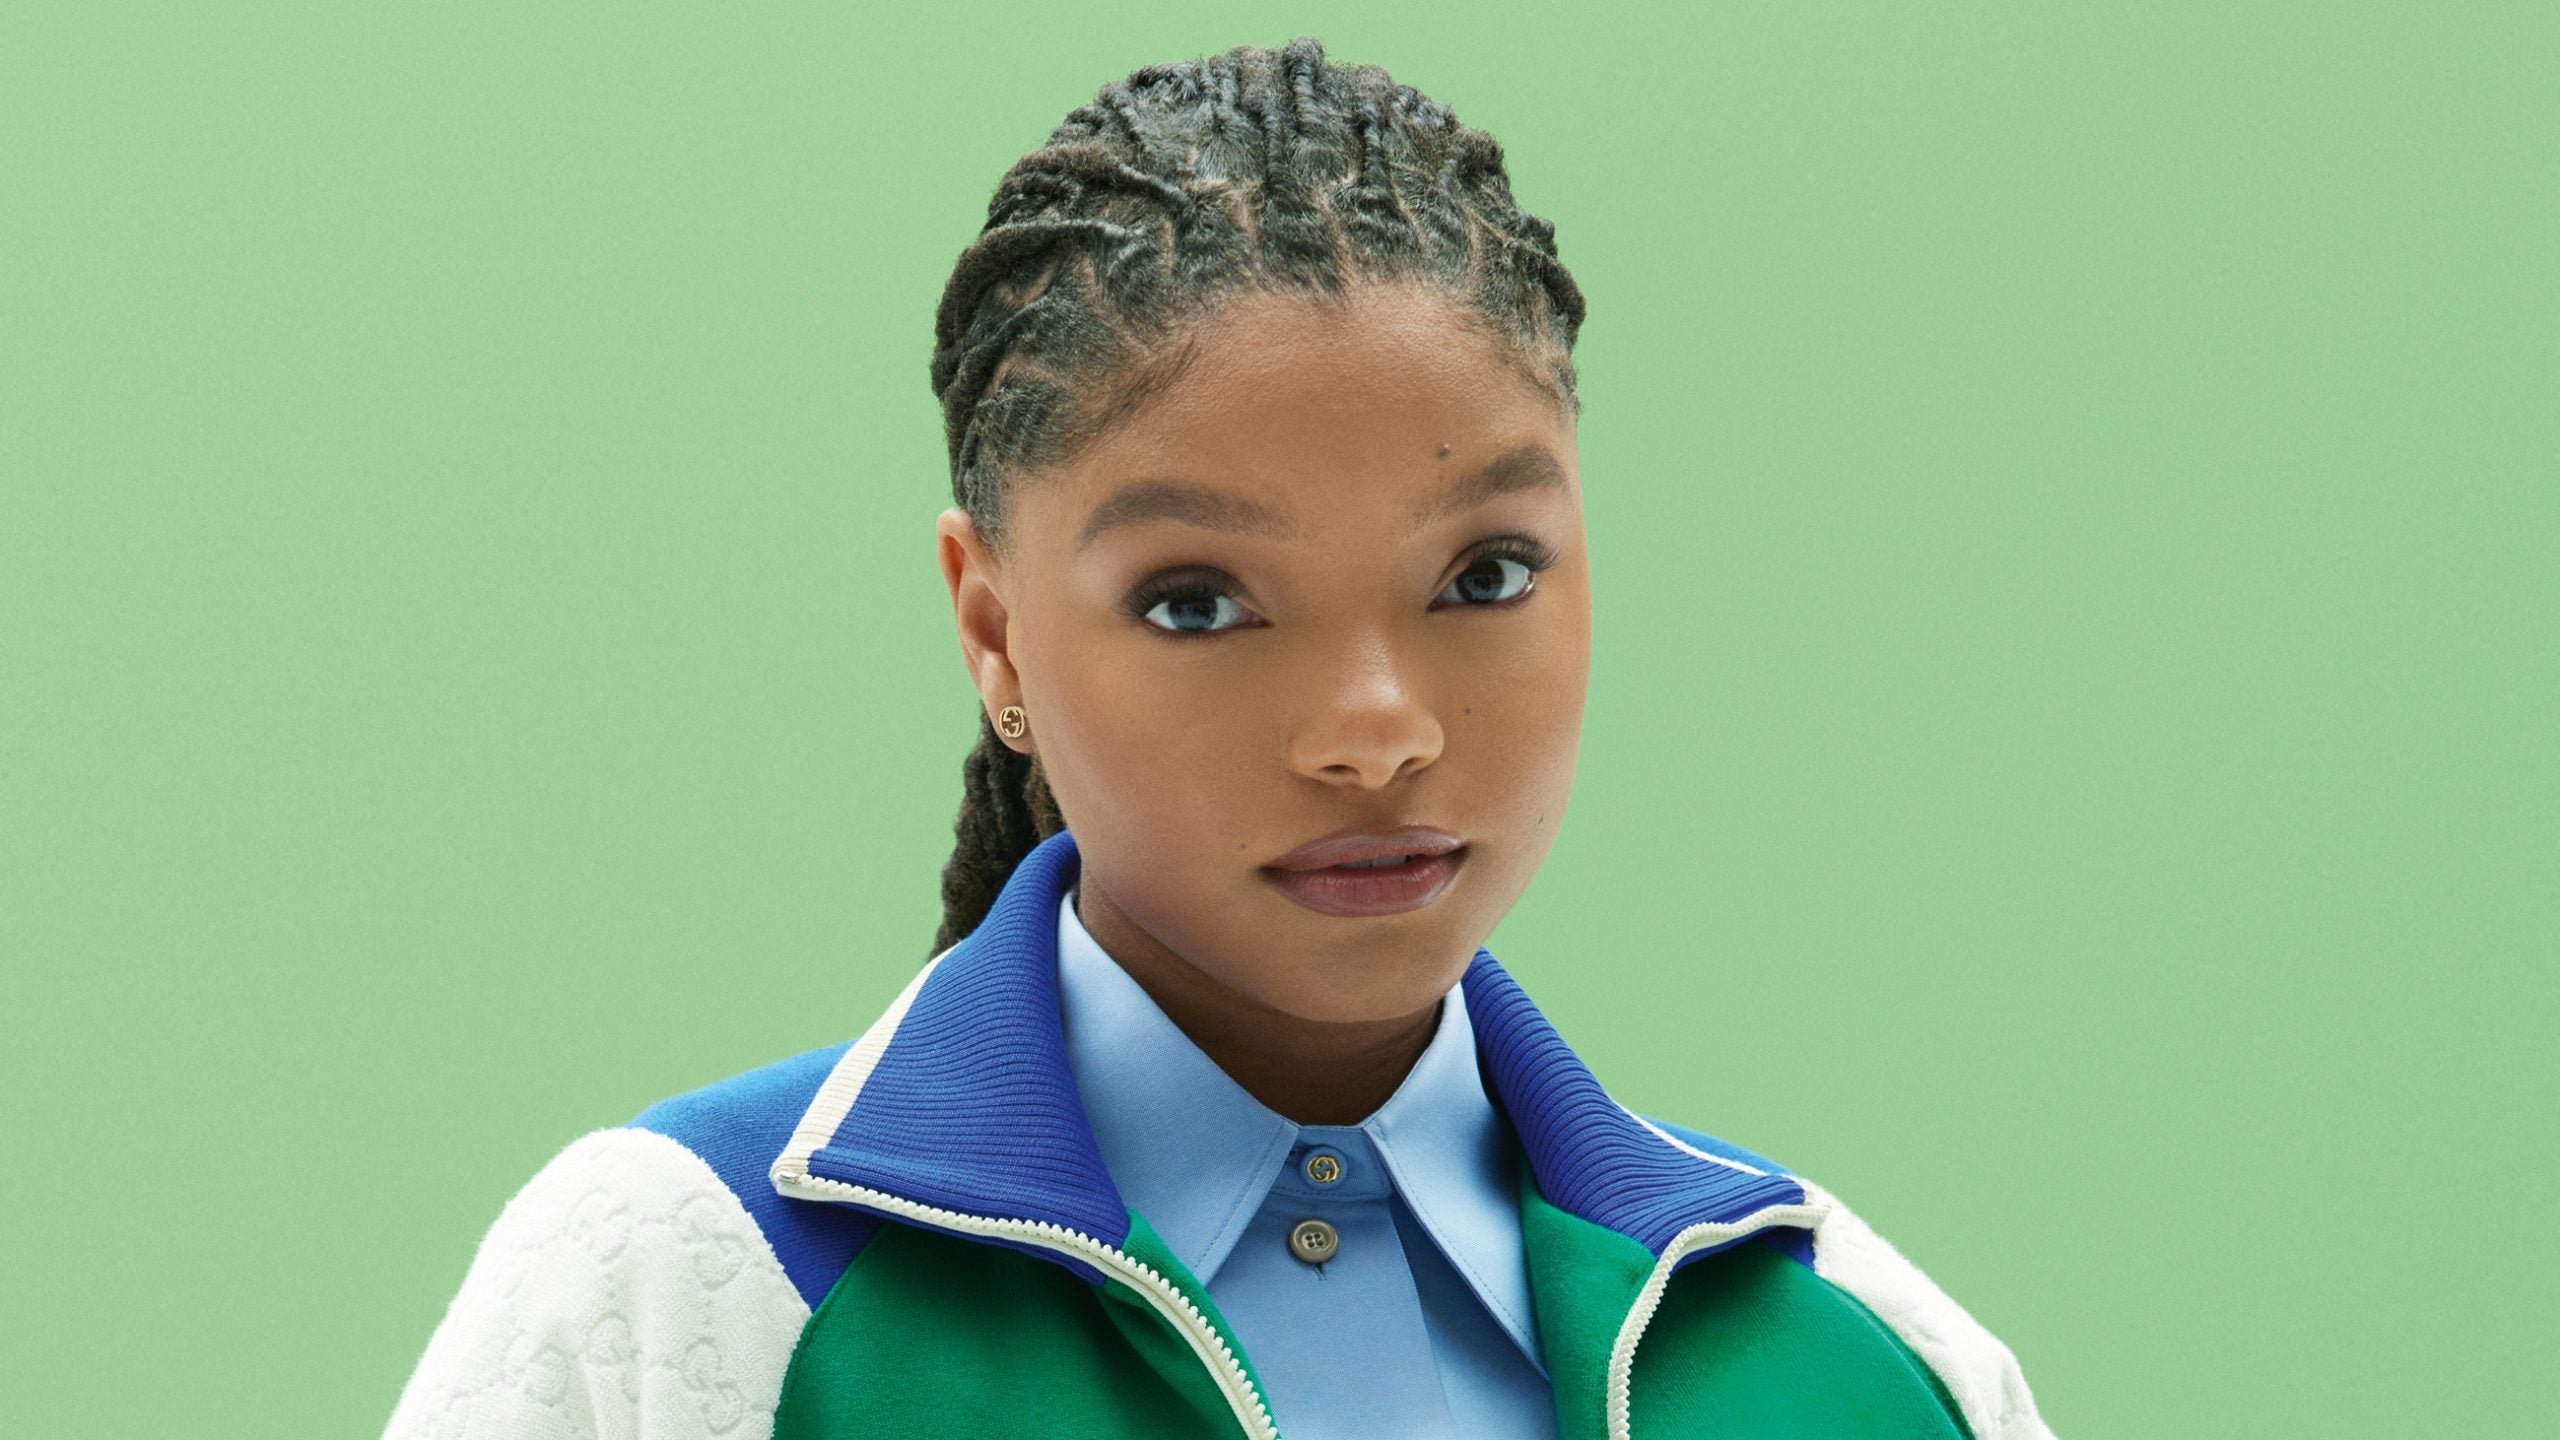 Essence Fashion Digest: Ivy Park and Adidas Part Ways, Halle Bailey For Gucci, And More